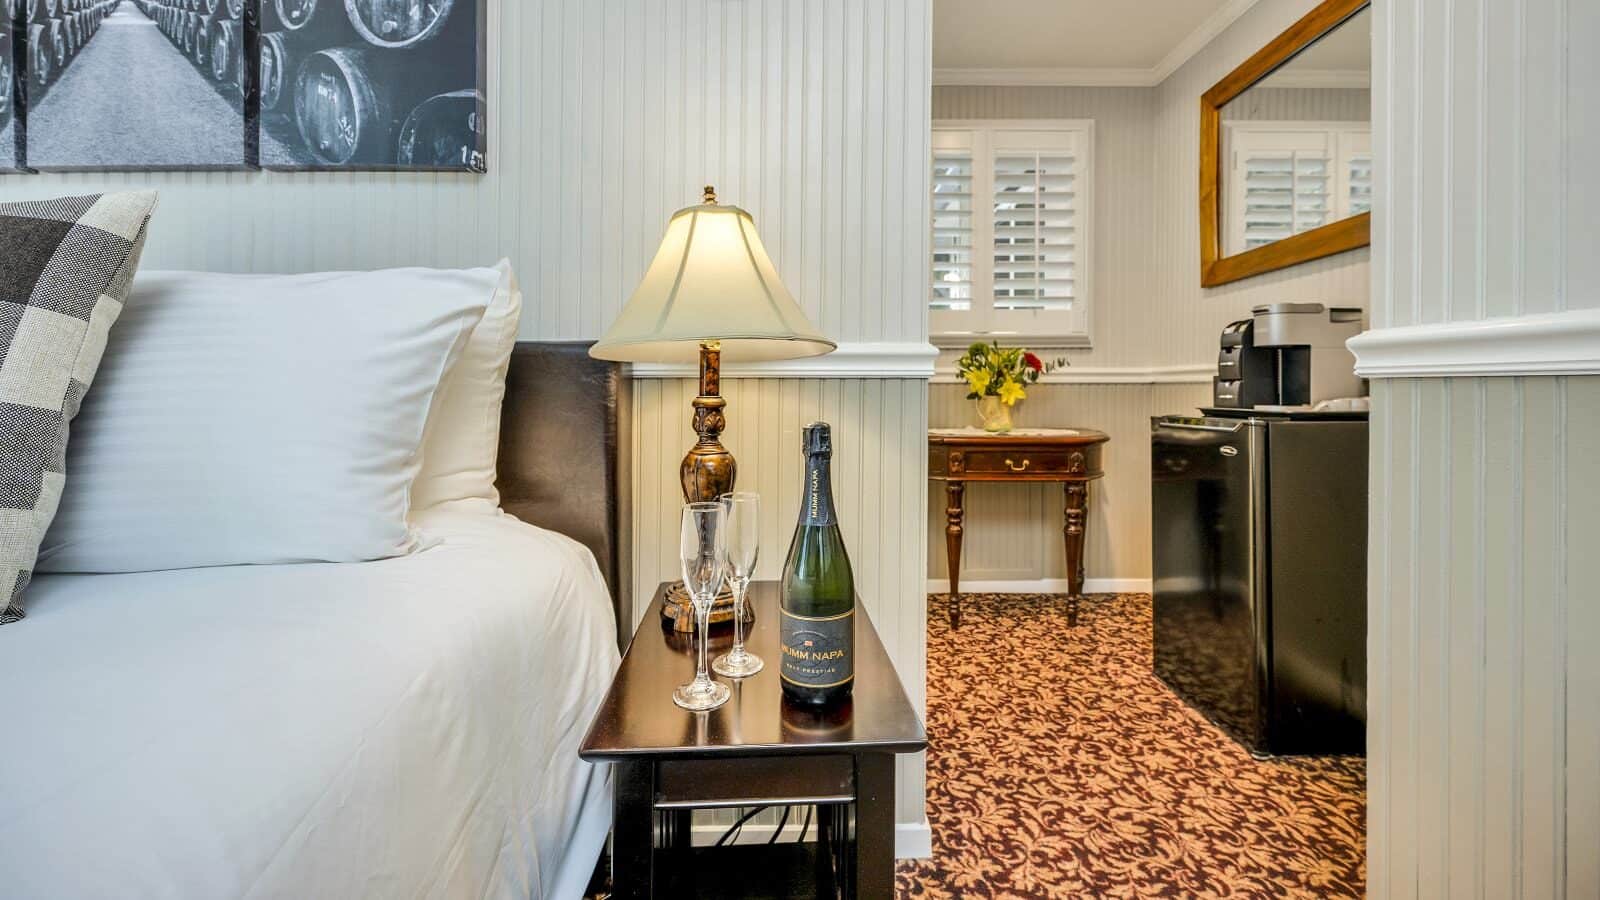 Close up view of bed with leather upholstered head board and white bedding and dark wooden nightstand with lamp, bottle of Champagne, and two Champagne flutes